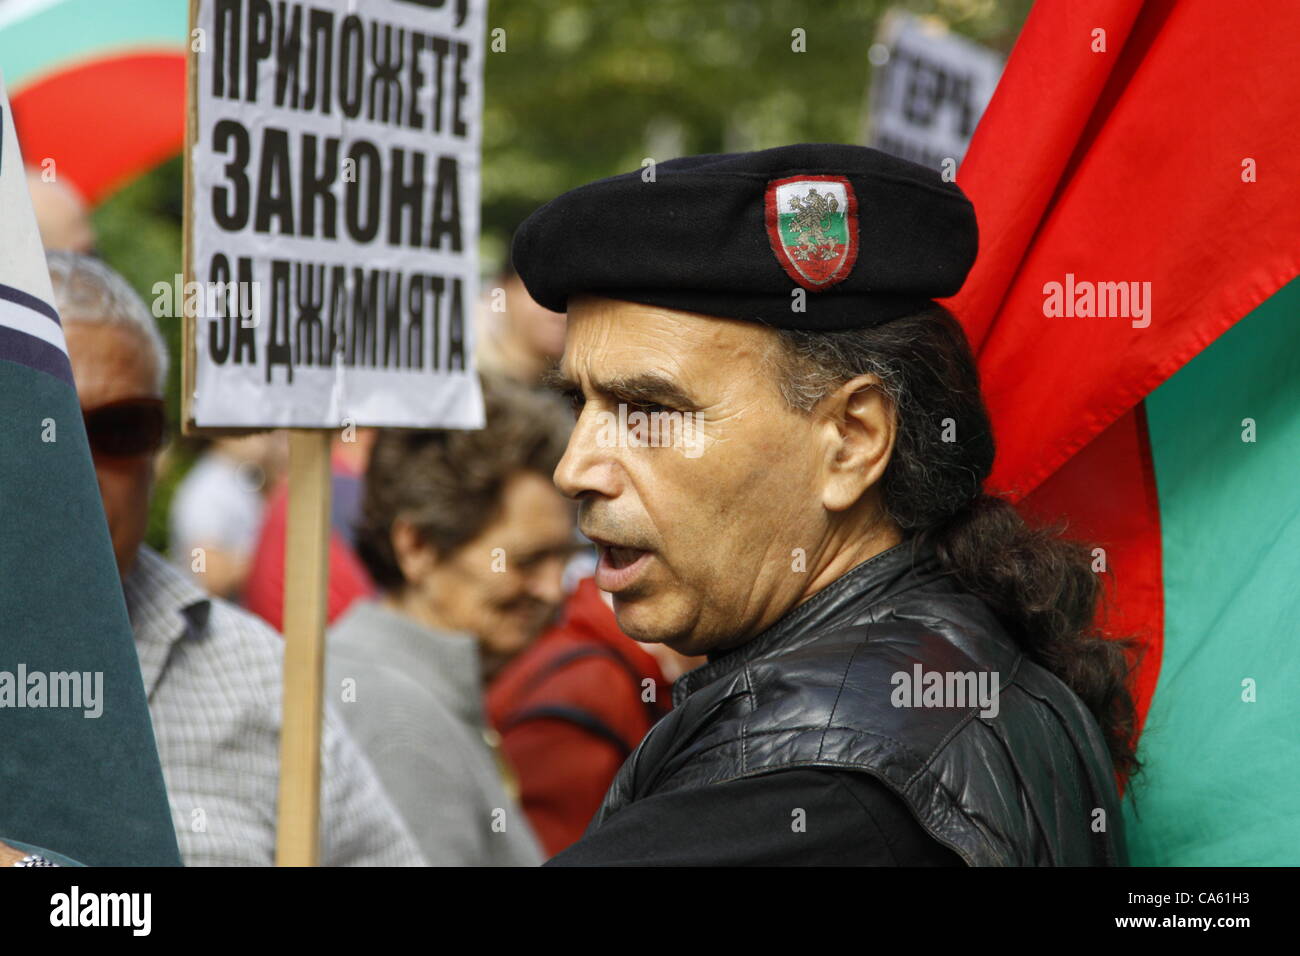 Member of the Bulgarian ultra-nationalist party ATAKA (Attack) in his 'party uniform'. The hard core of the extreme right party activists wear all-black outfits. Sofia, Bulgaria, 14/06/2012 Stock Photo